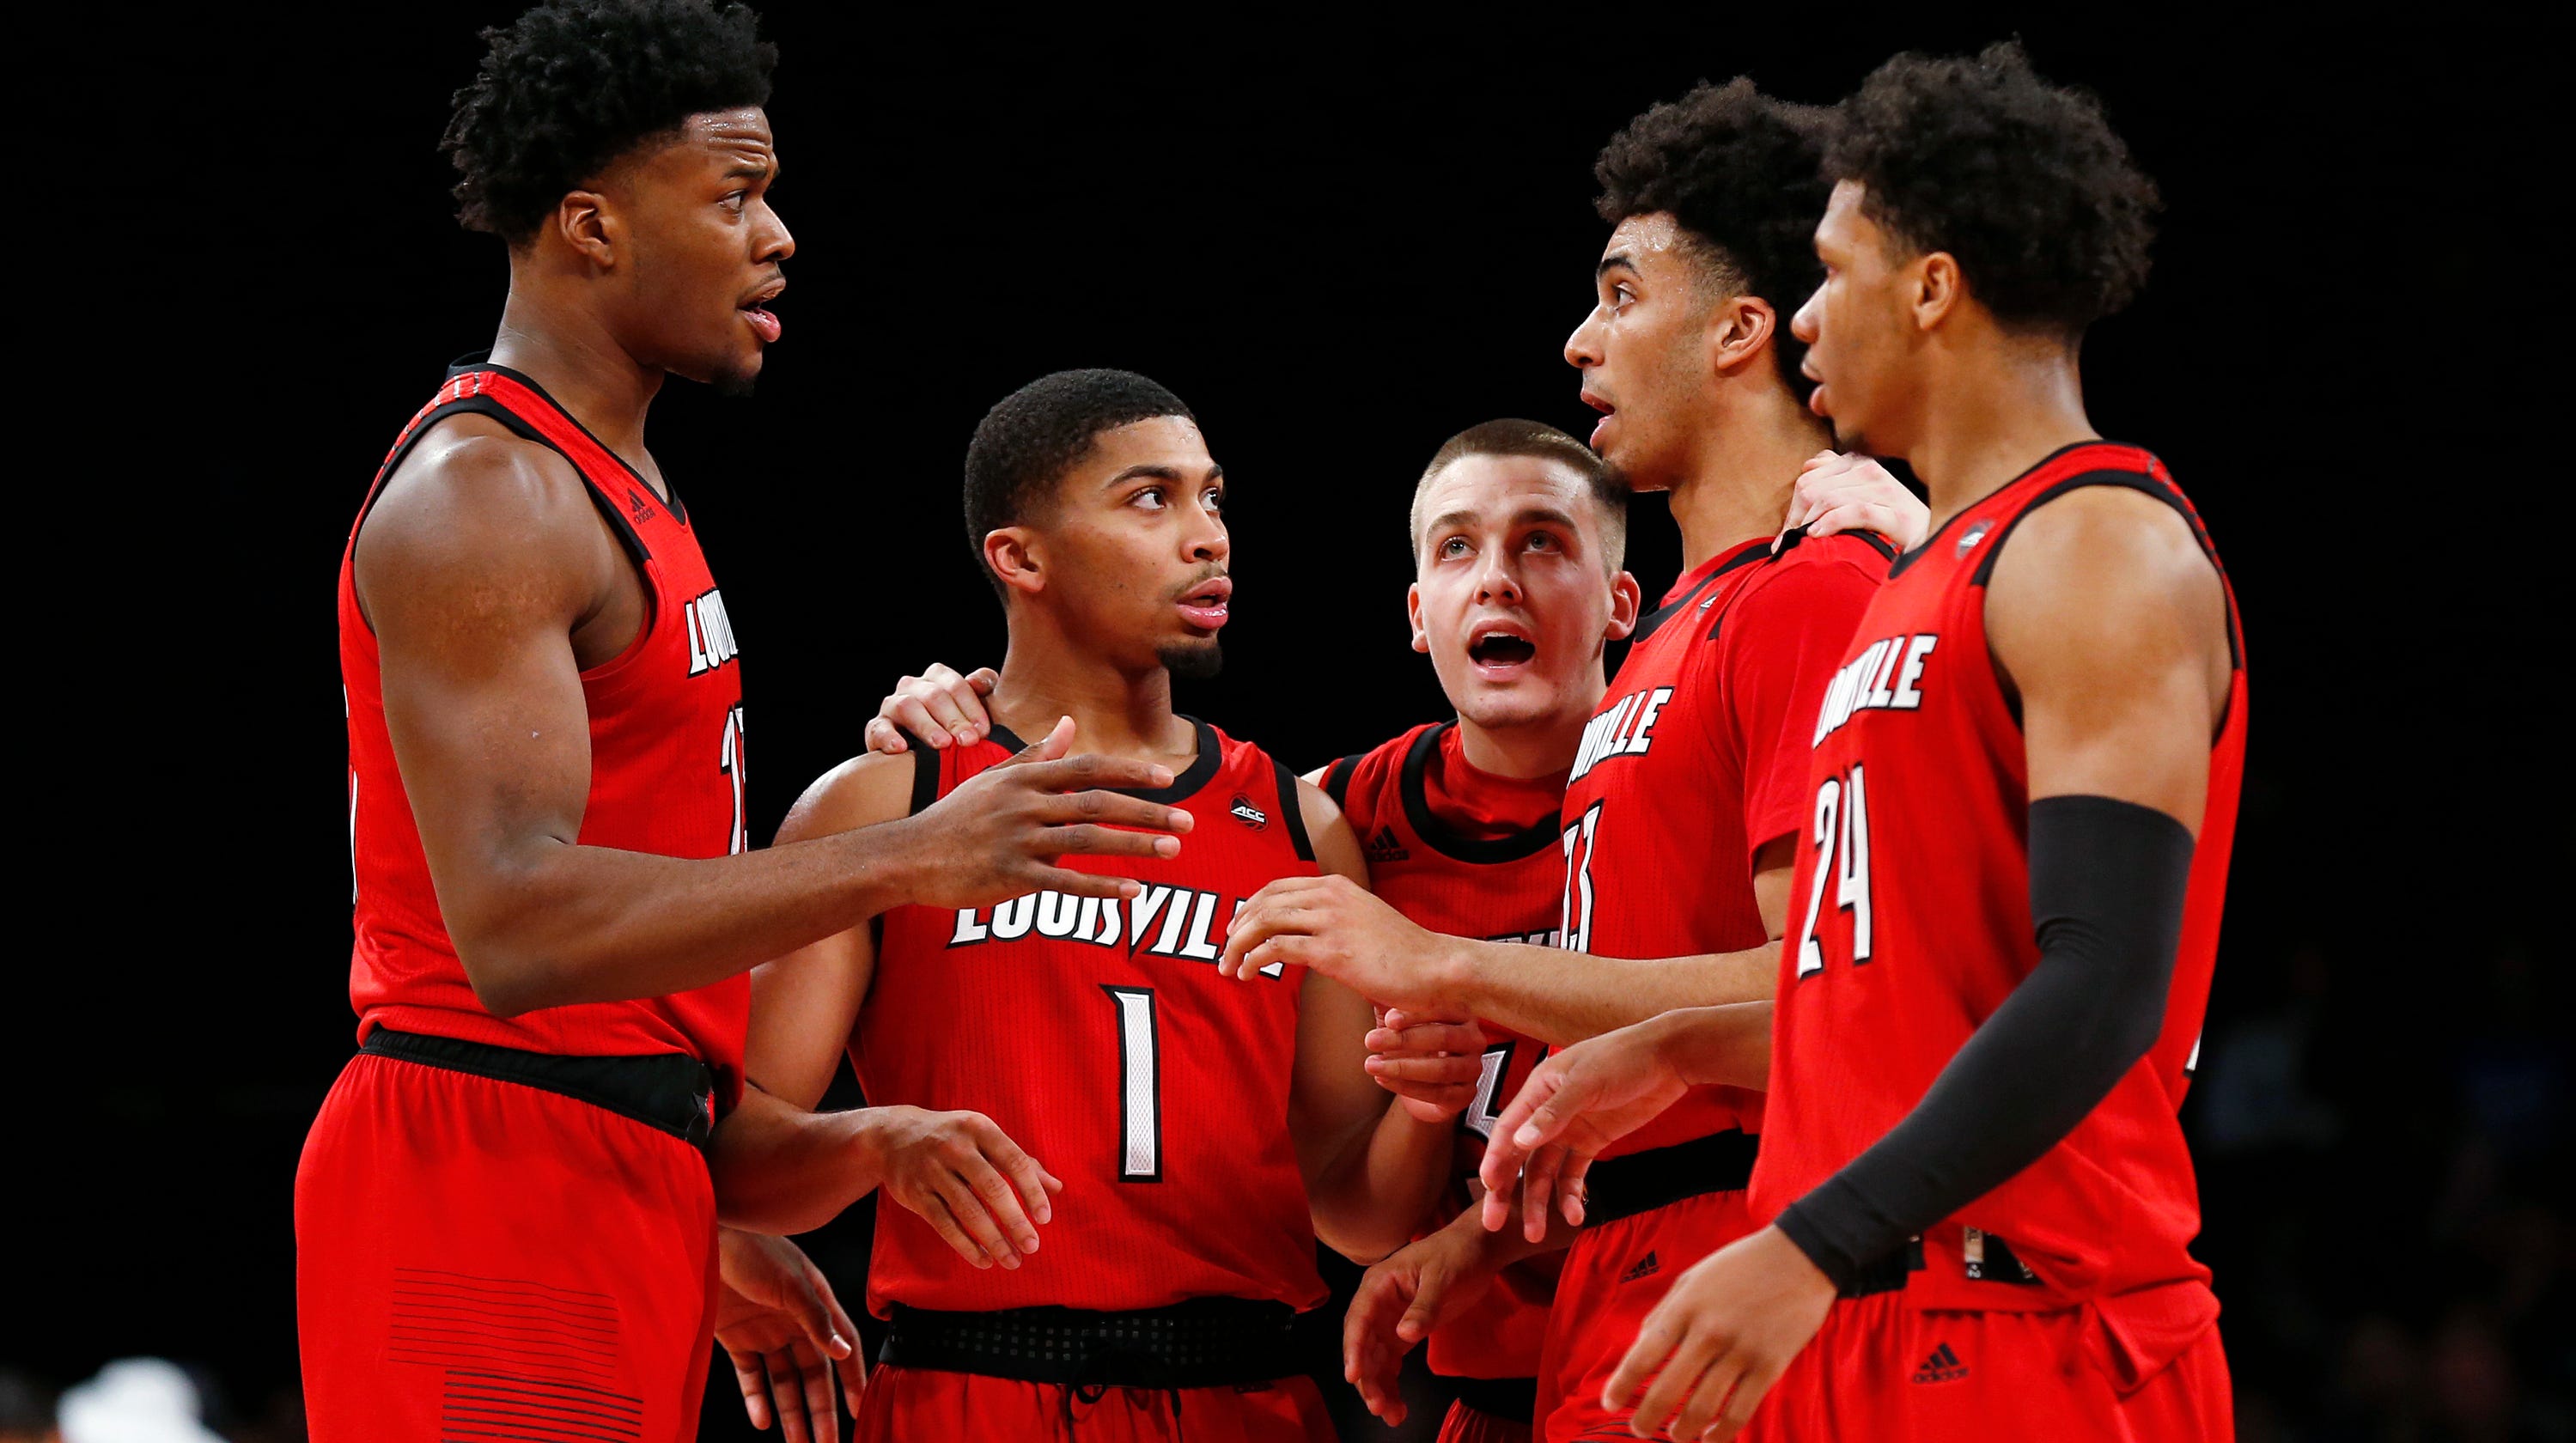 Louisville basketball: How the Cards dealt with first loss